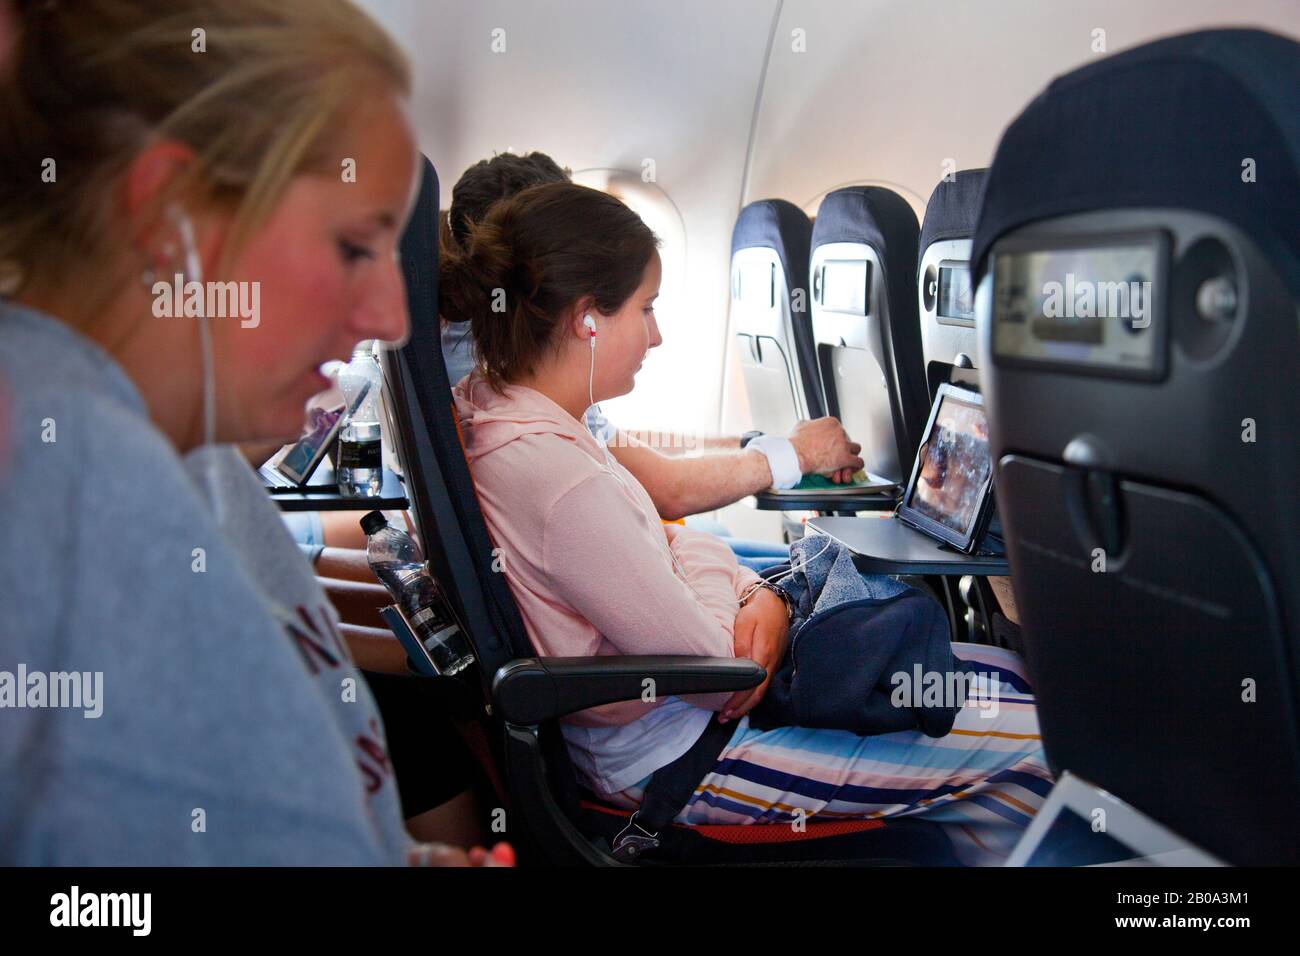 Teenage girls ( both model released ) sitting on Easyjet aircraft wearing  headphones and watching portable media ( ipad ) during flight Stock Photo -  Alamy